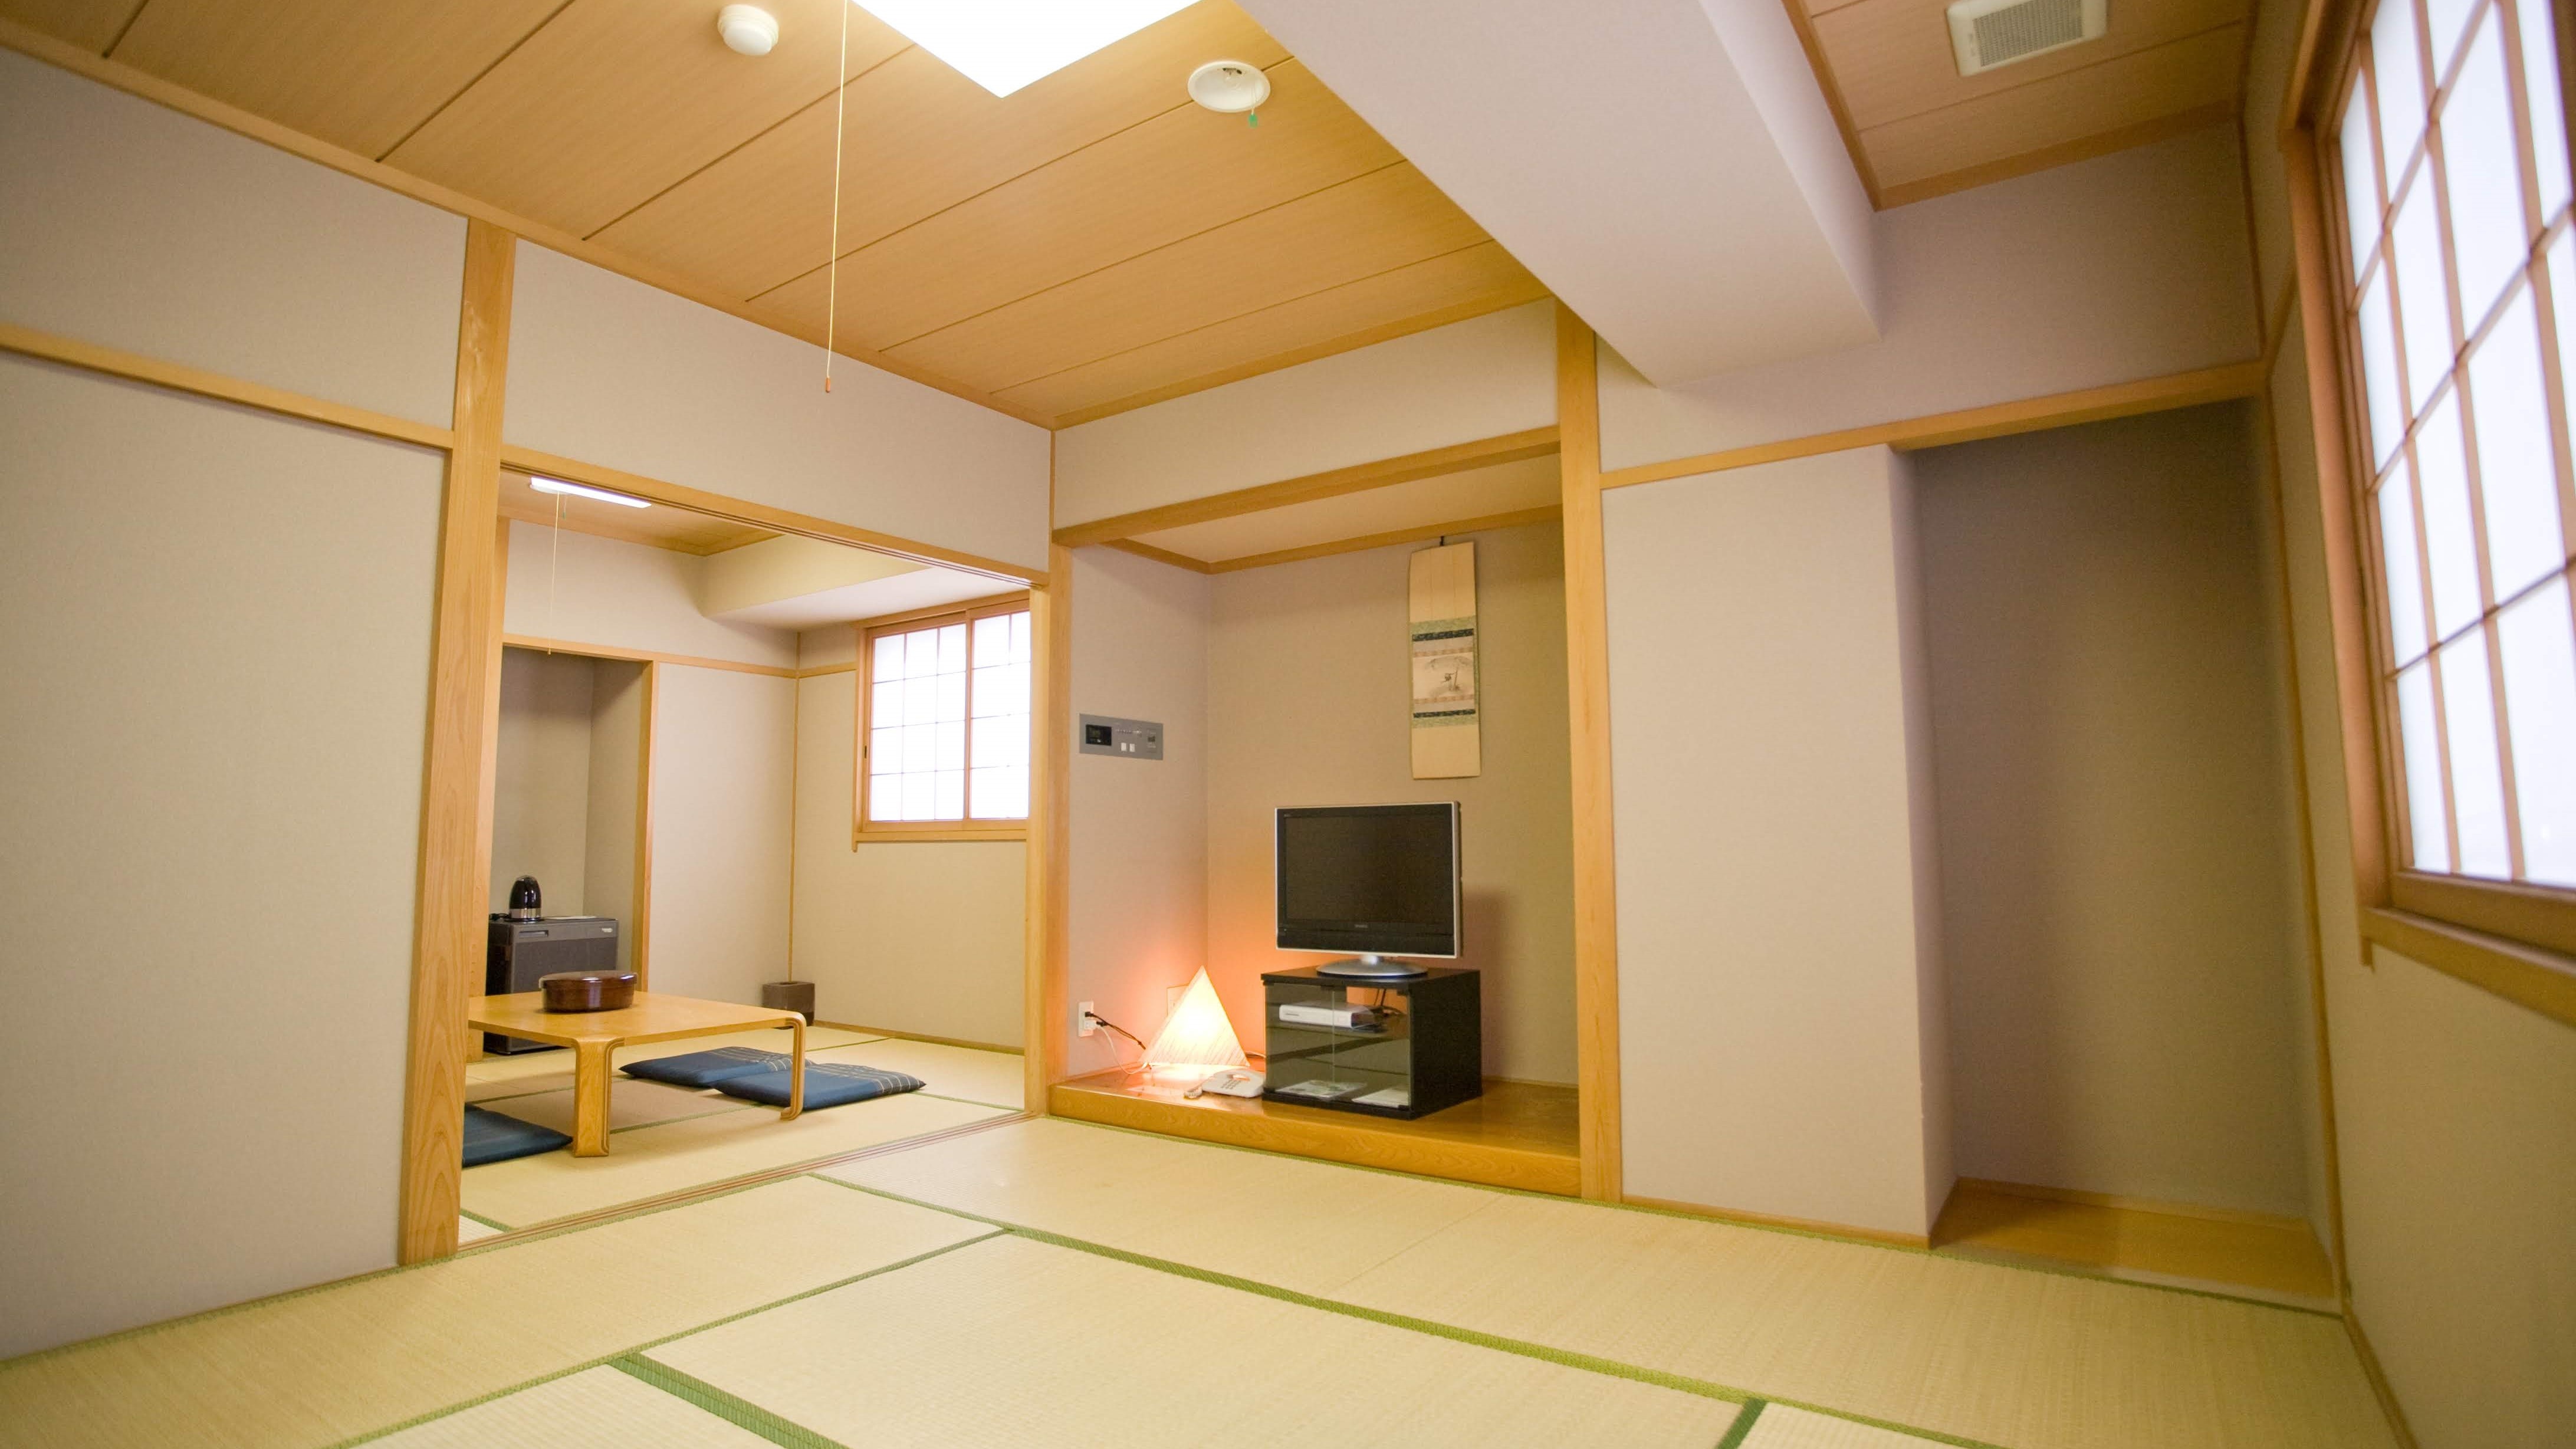 Japanese-style room "WA" There are two rooms, 6 tatami mats and 8 tatami mats [corner room]